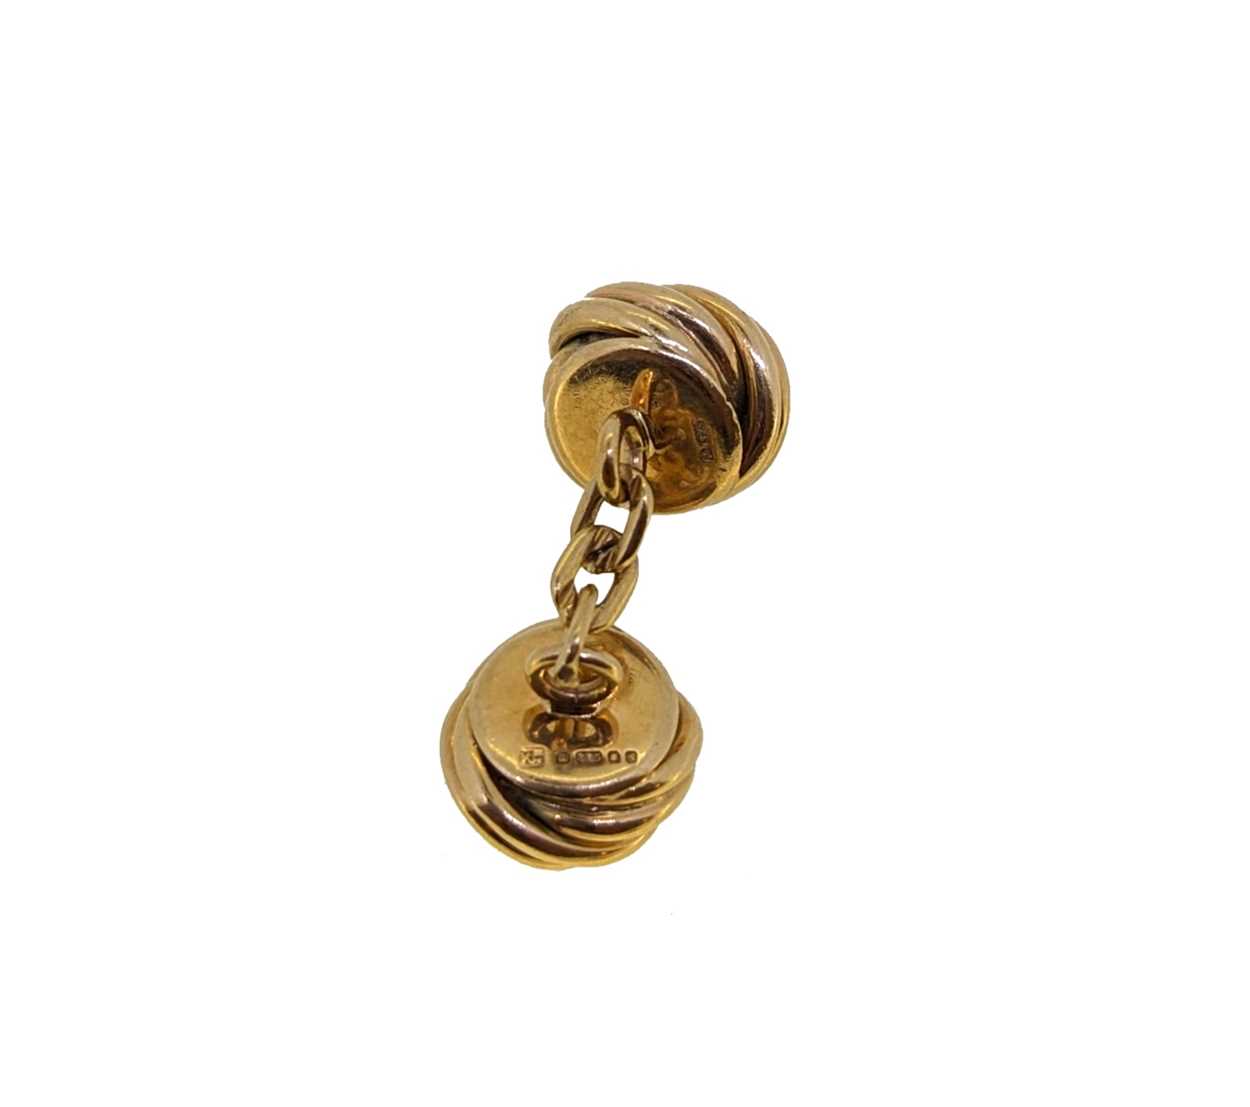 Kurt Weiss for Asprey - A pair of 9ct gold knot style cufflinks, - Image 3 of 3